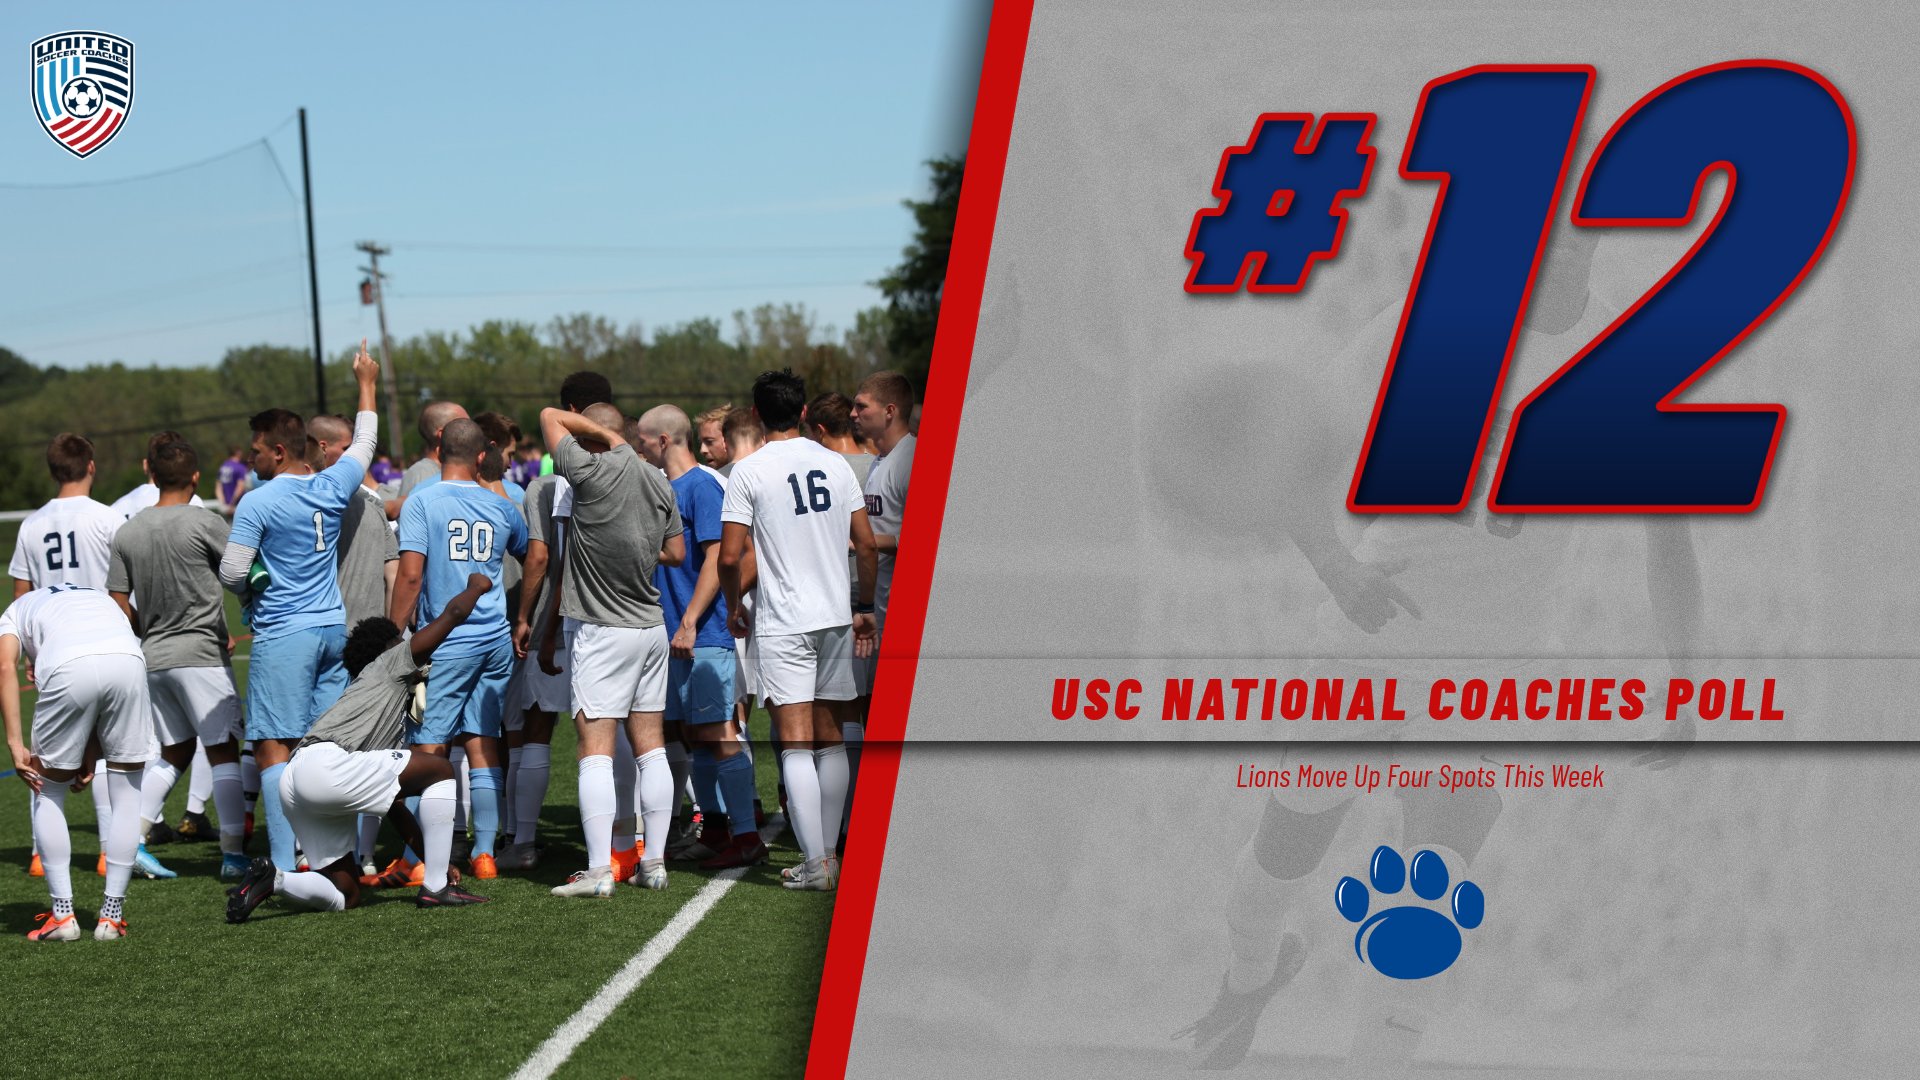 Men's Soccer Ranked 12th in USC Coaches Poll